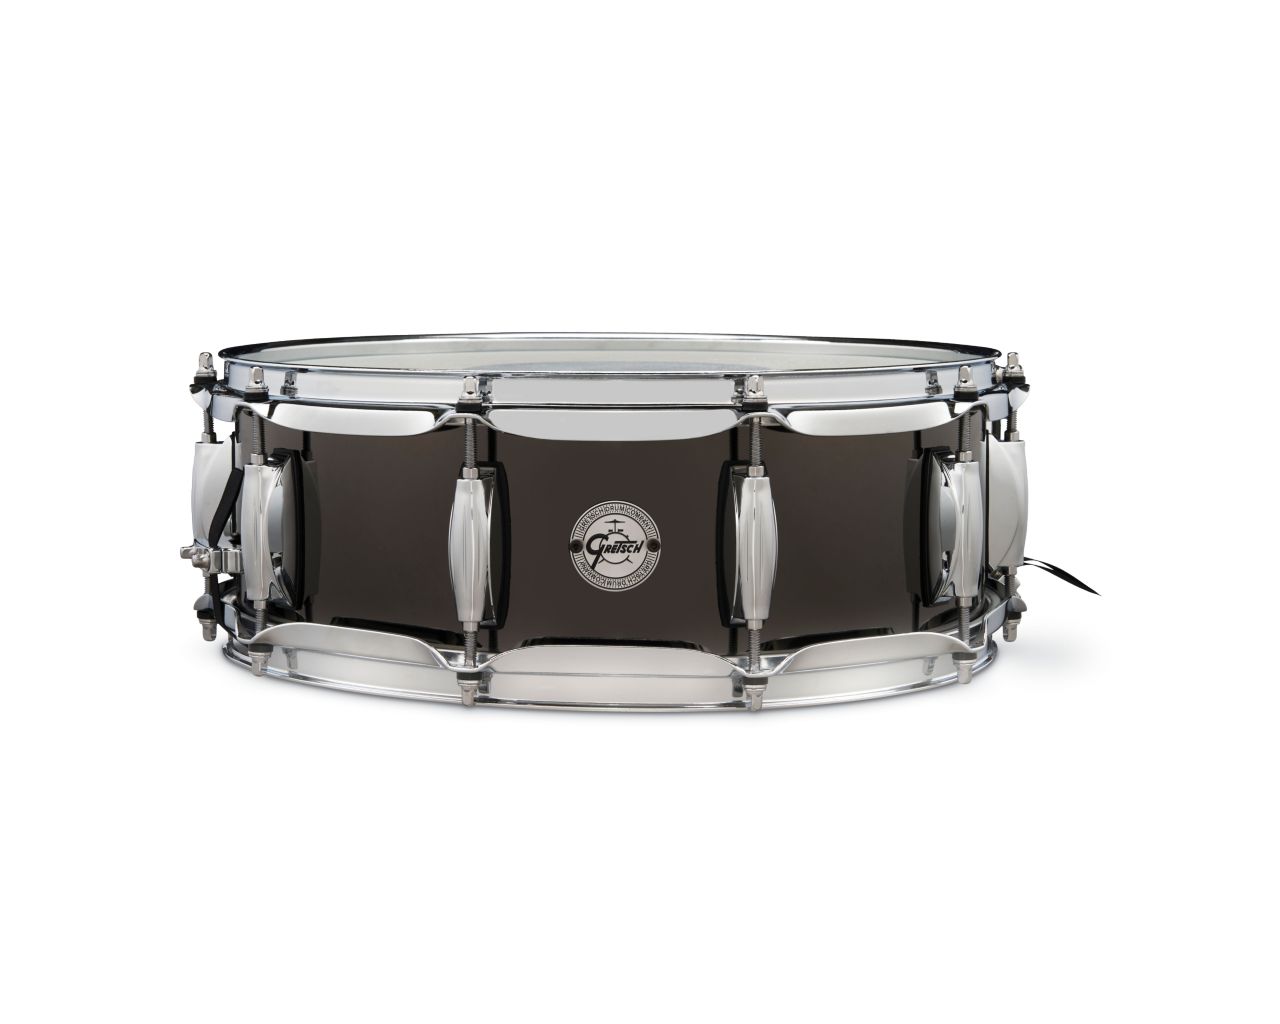 GRETSCH DRUMS CAISSE CLAIRE FULL RANGE 14